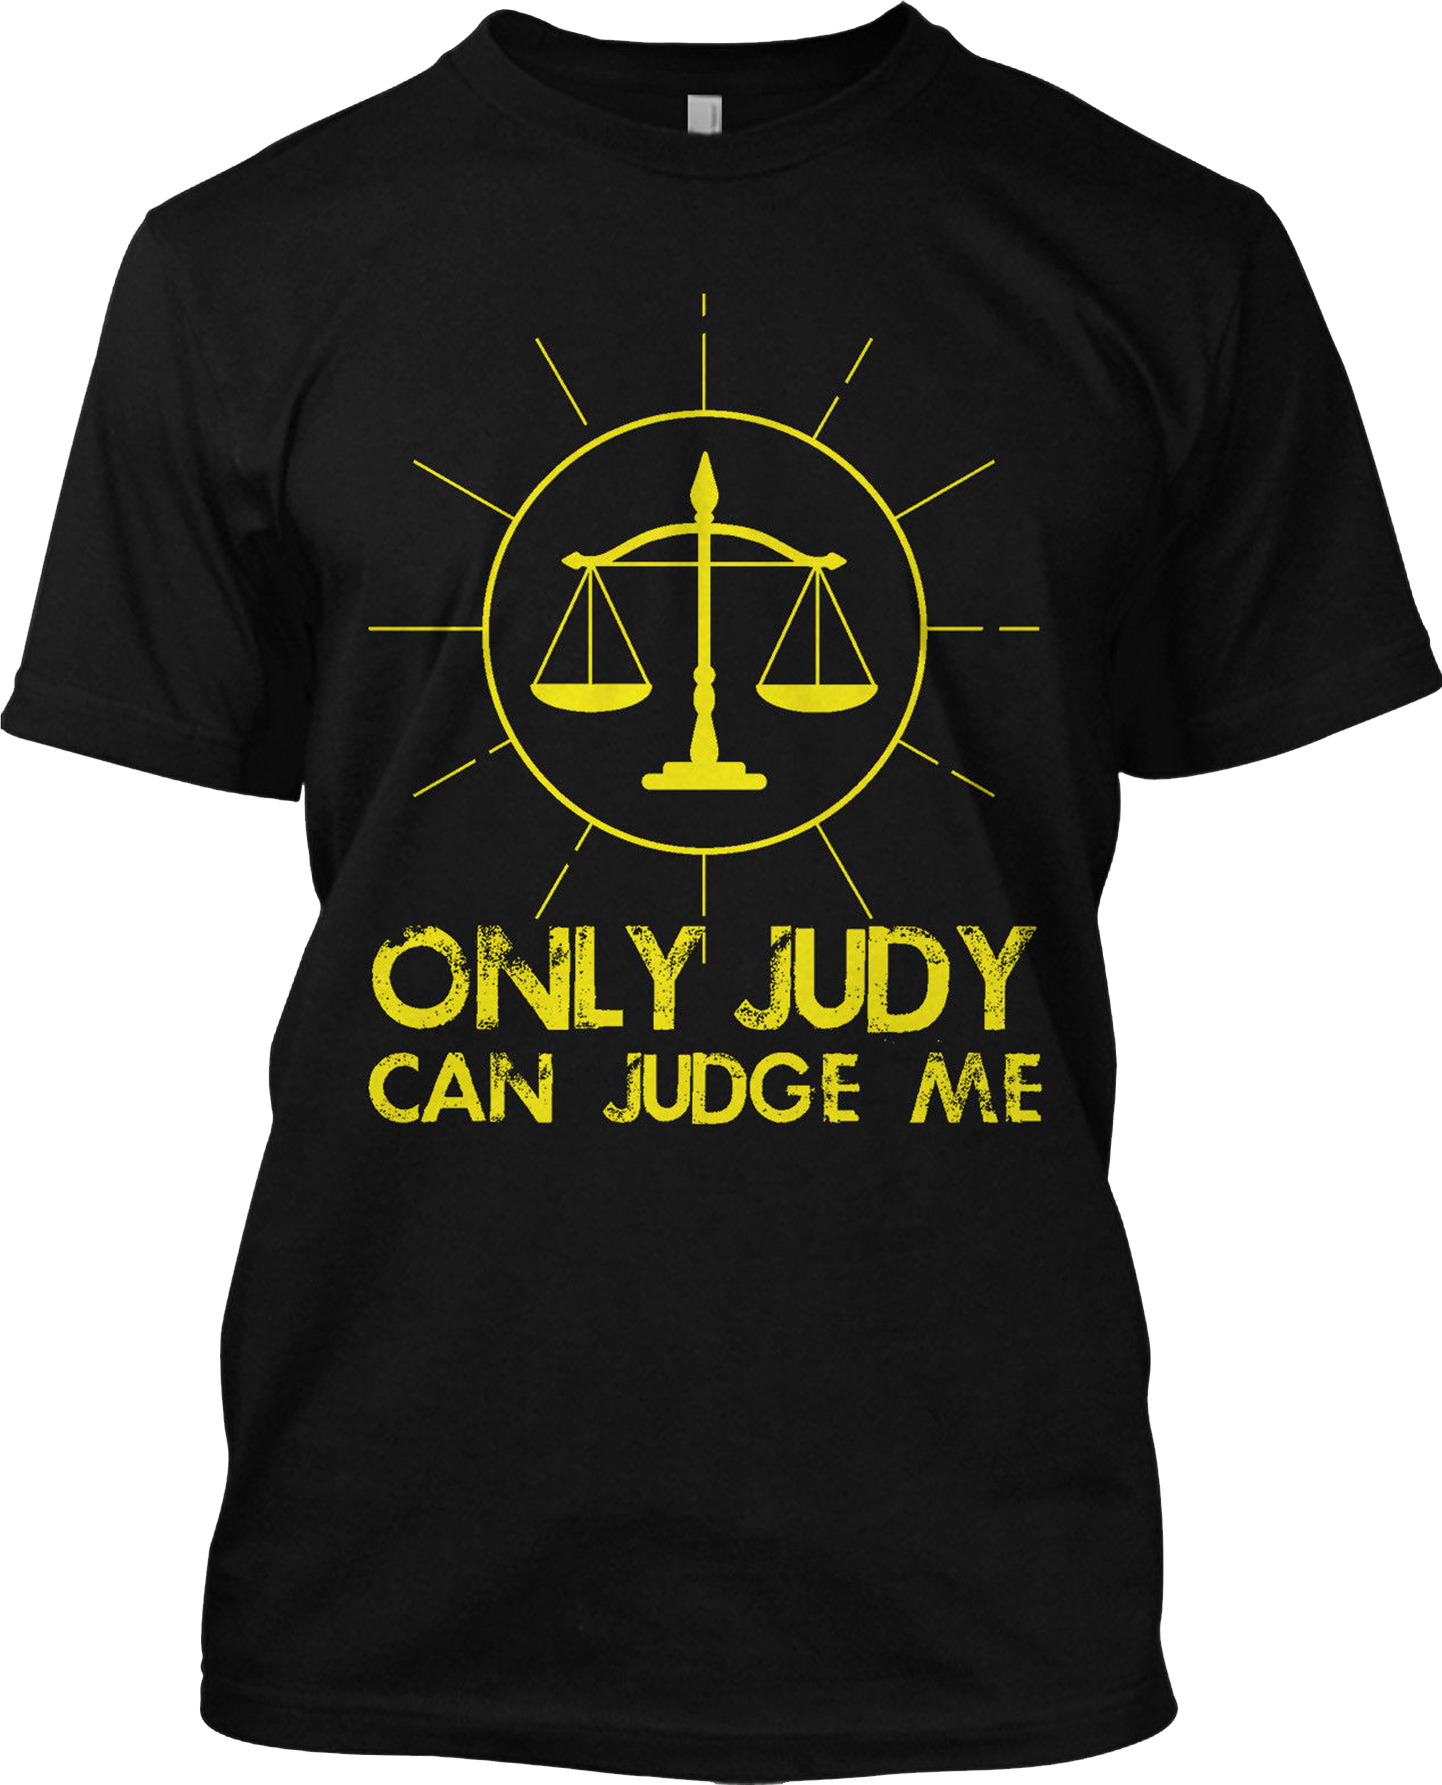 Only Judy Can Judge Me Funny Slogan T Shirt Graphic Balance Tee